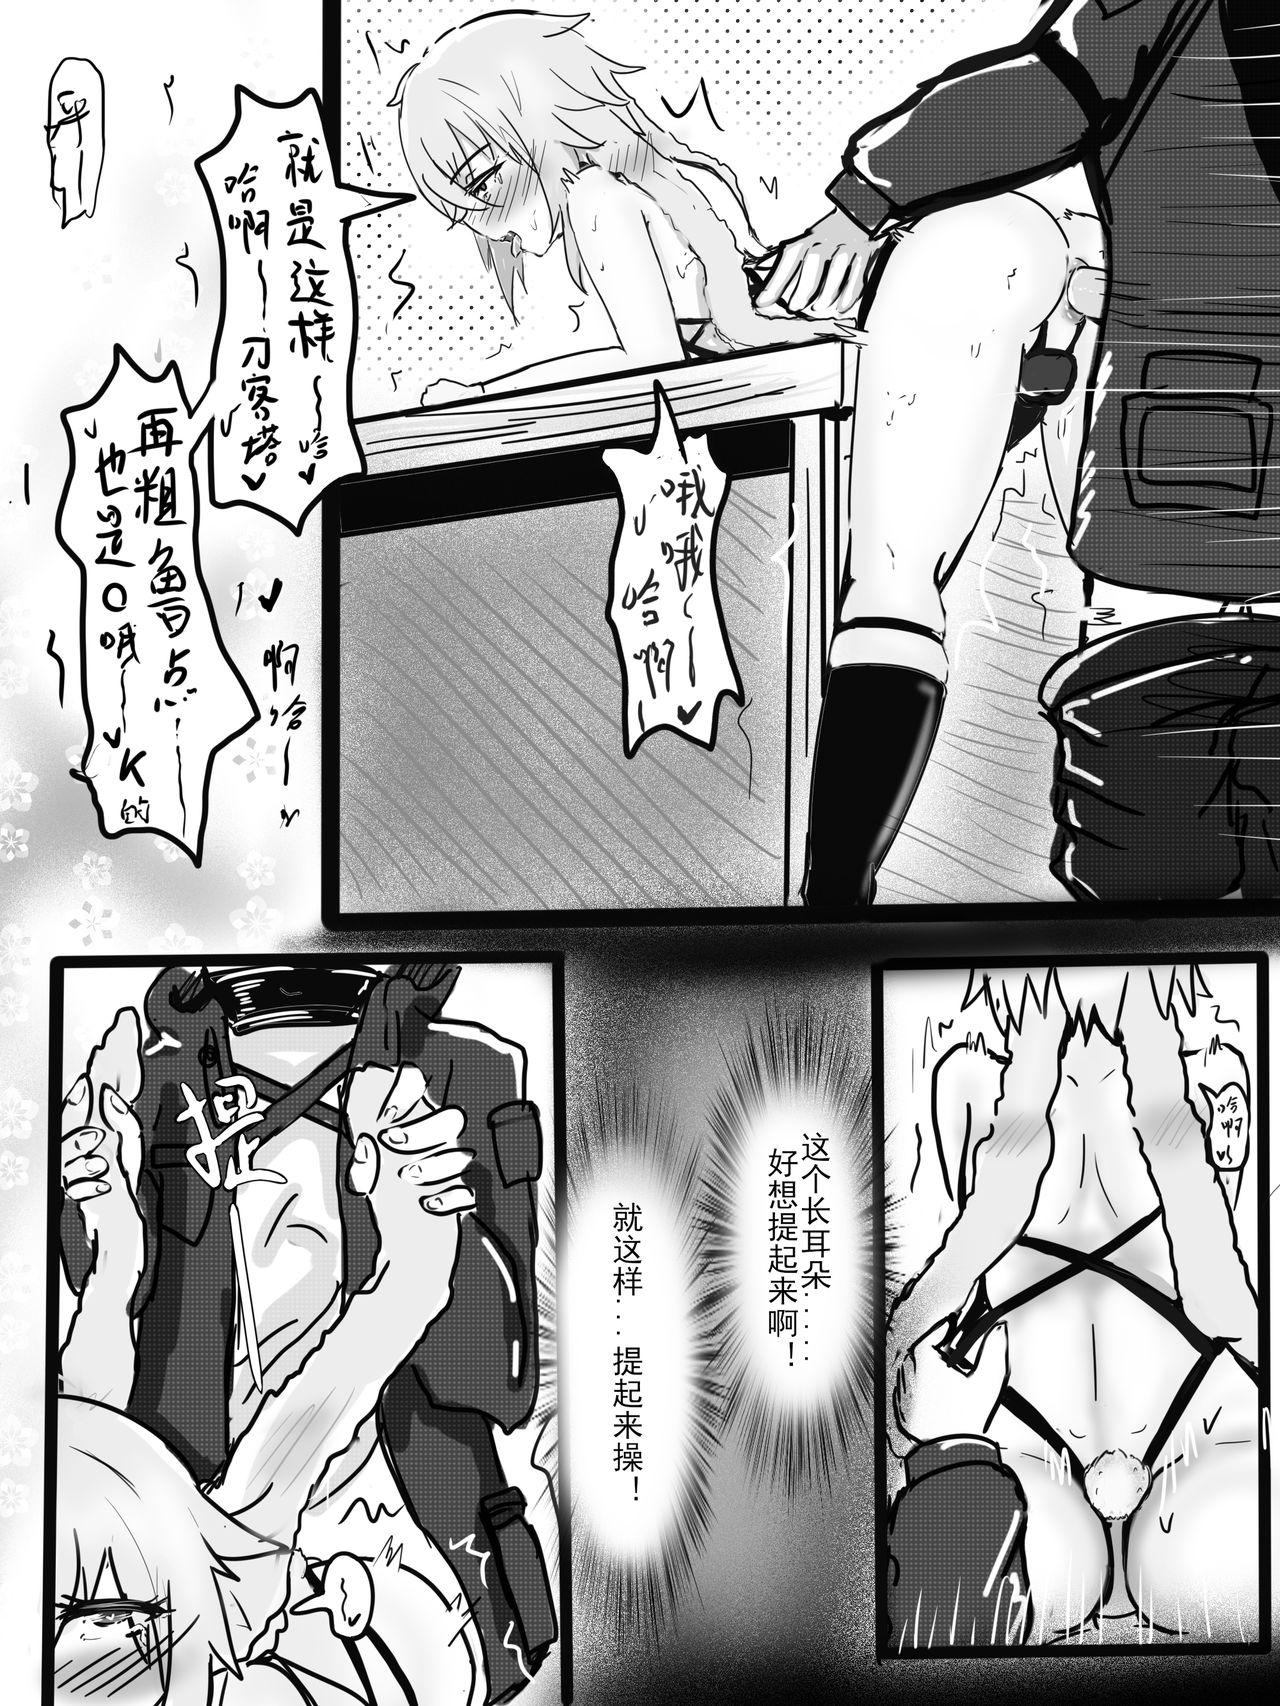 Wet Pussy 安赛尔的特别服务1 - Arknights Man - Page 10